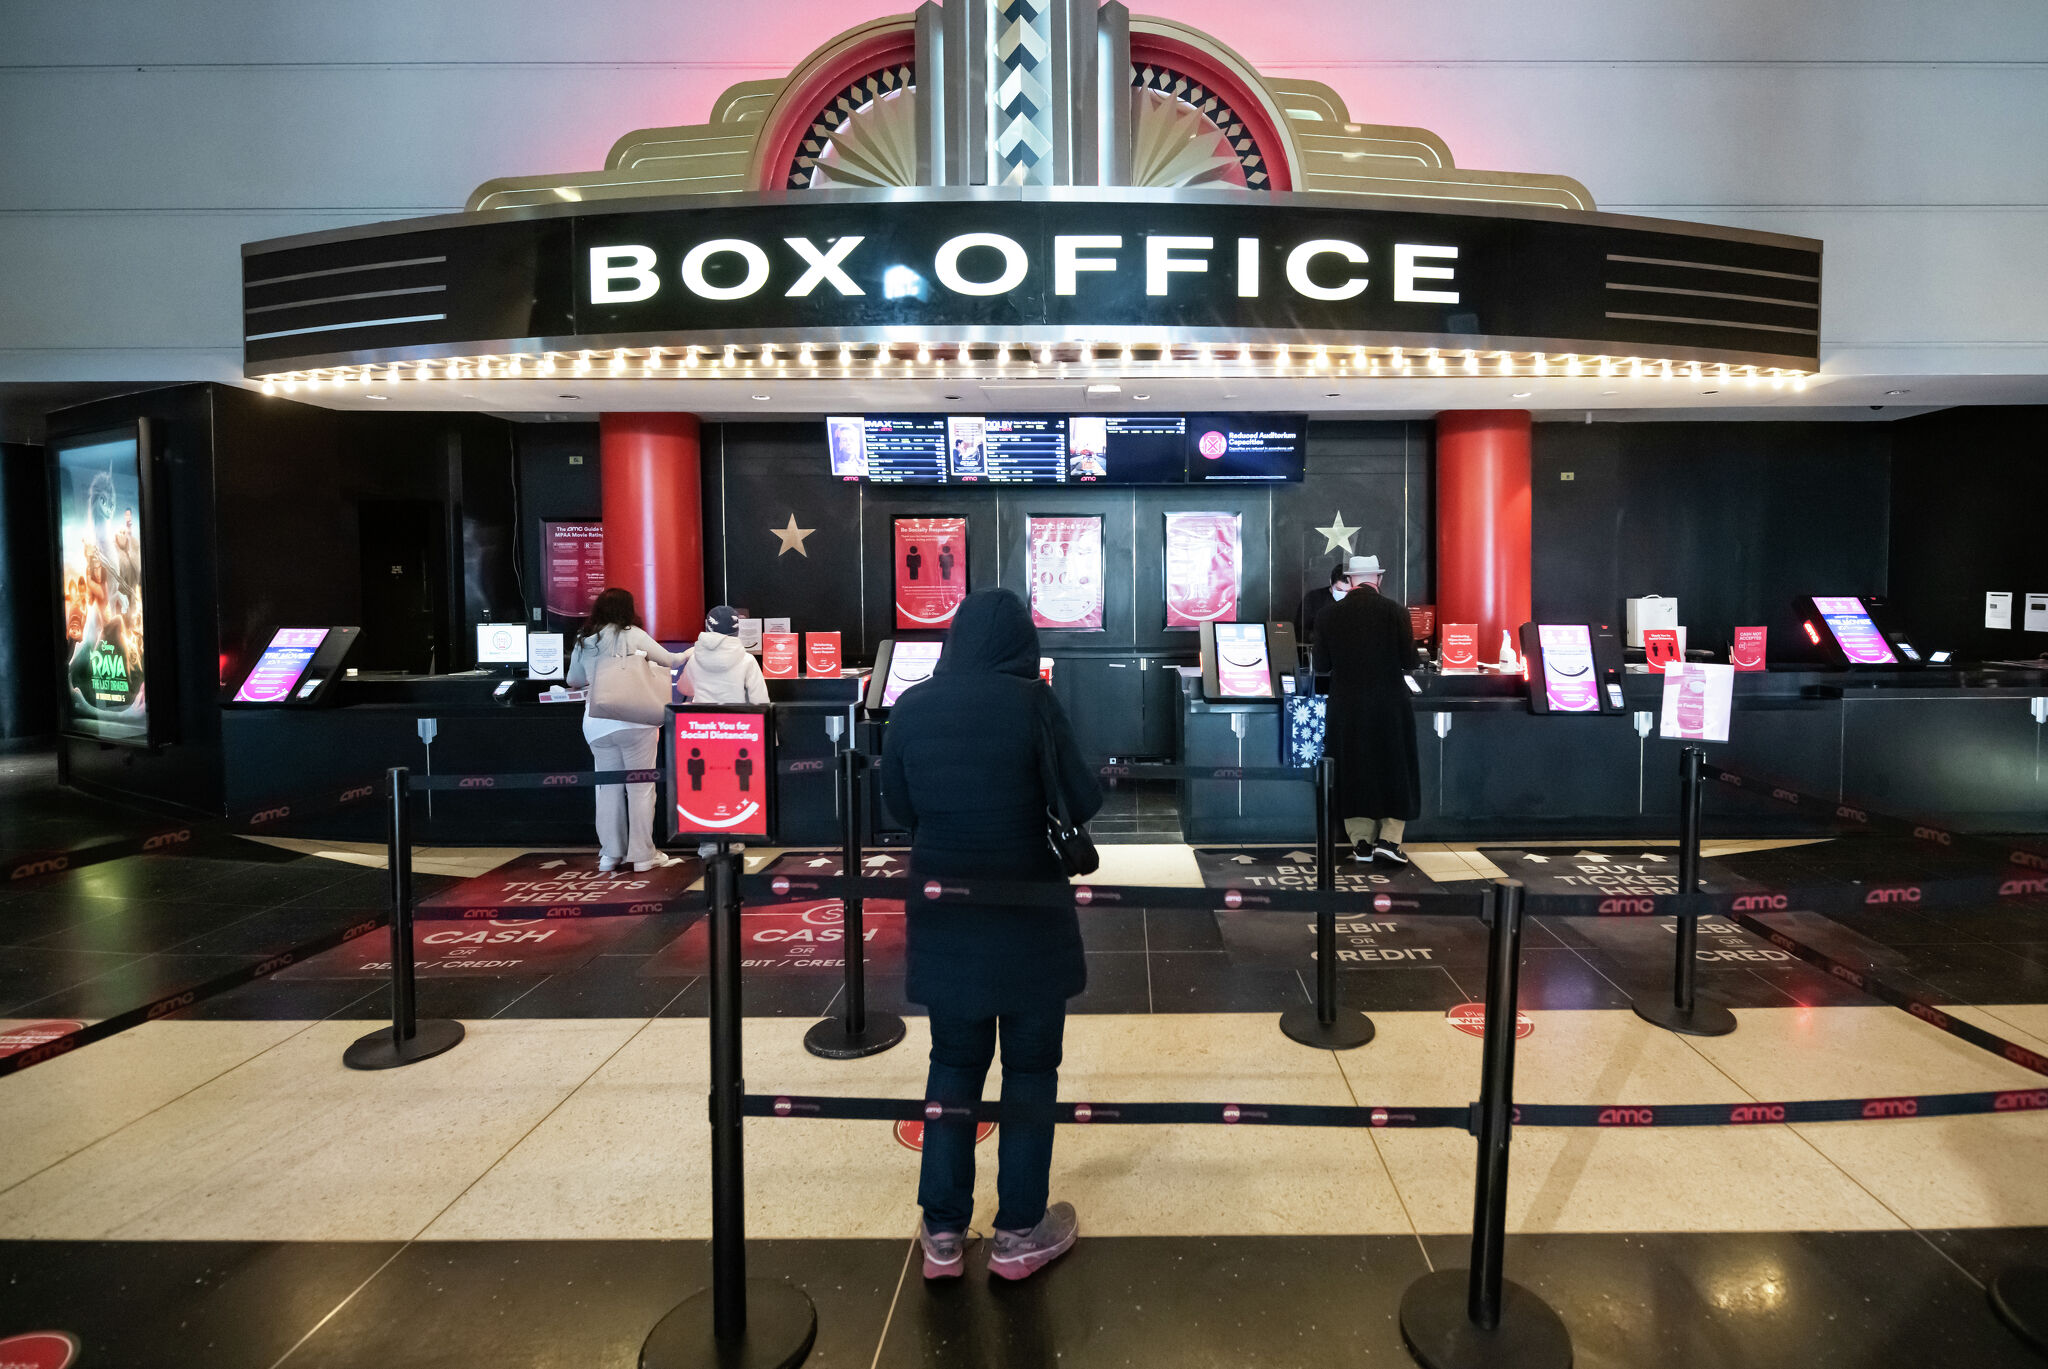 National Cinema Day' to offer $4 movie tickets for one day